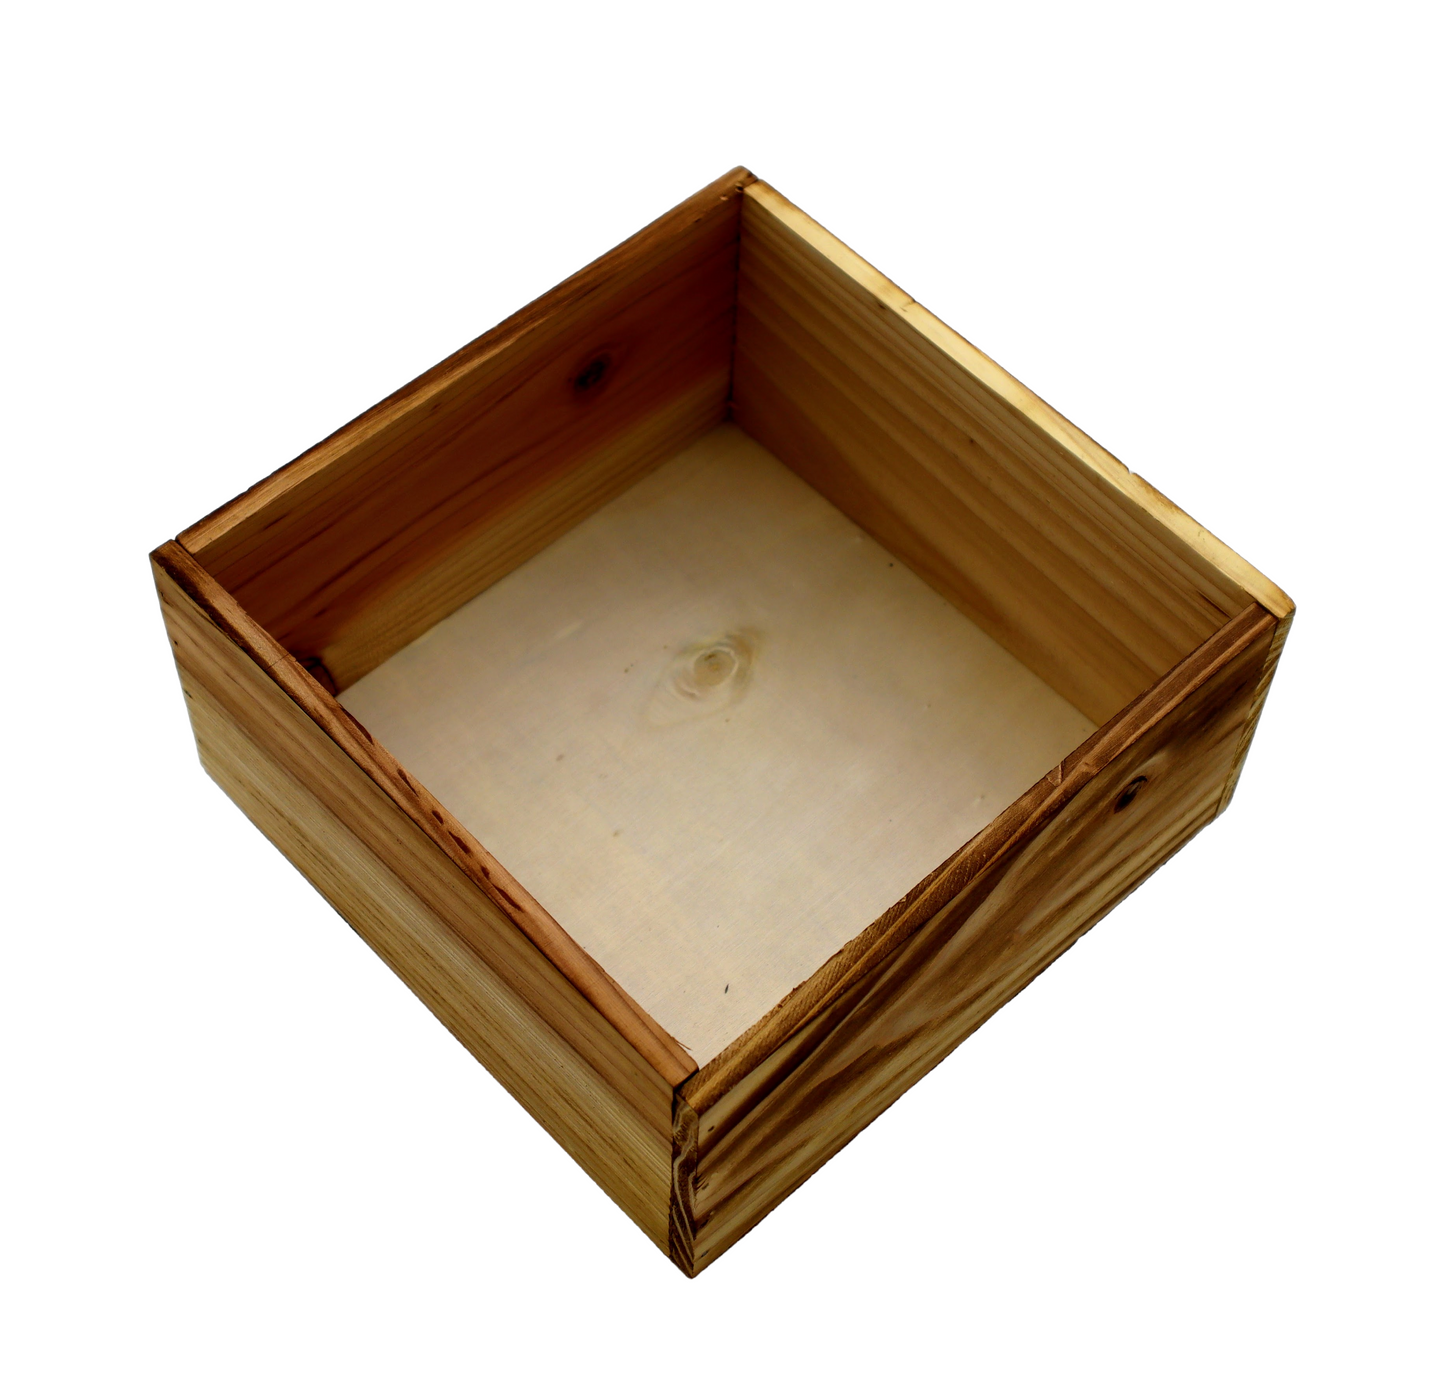 Wood Container 4x8 Square